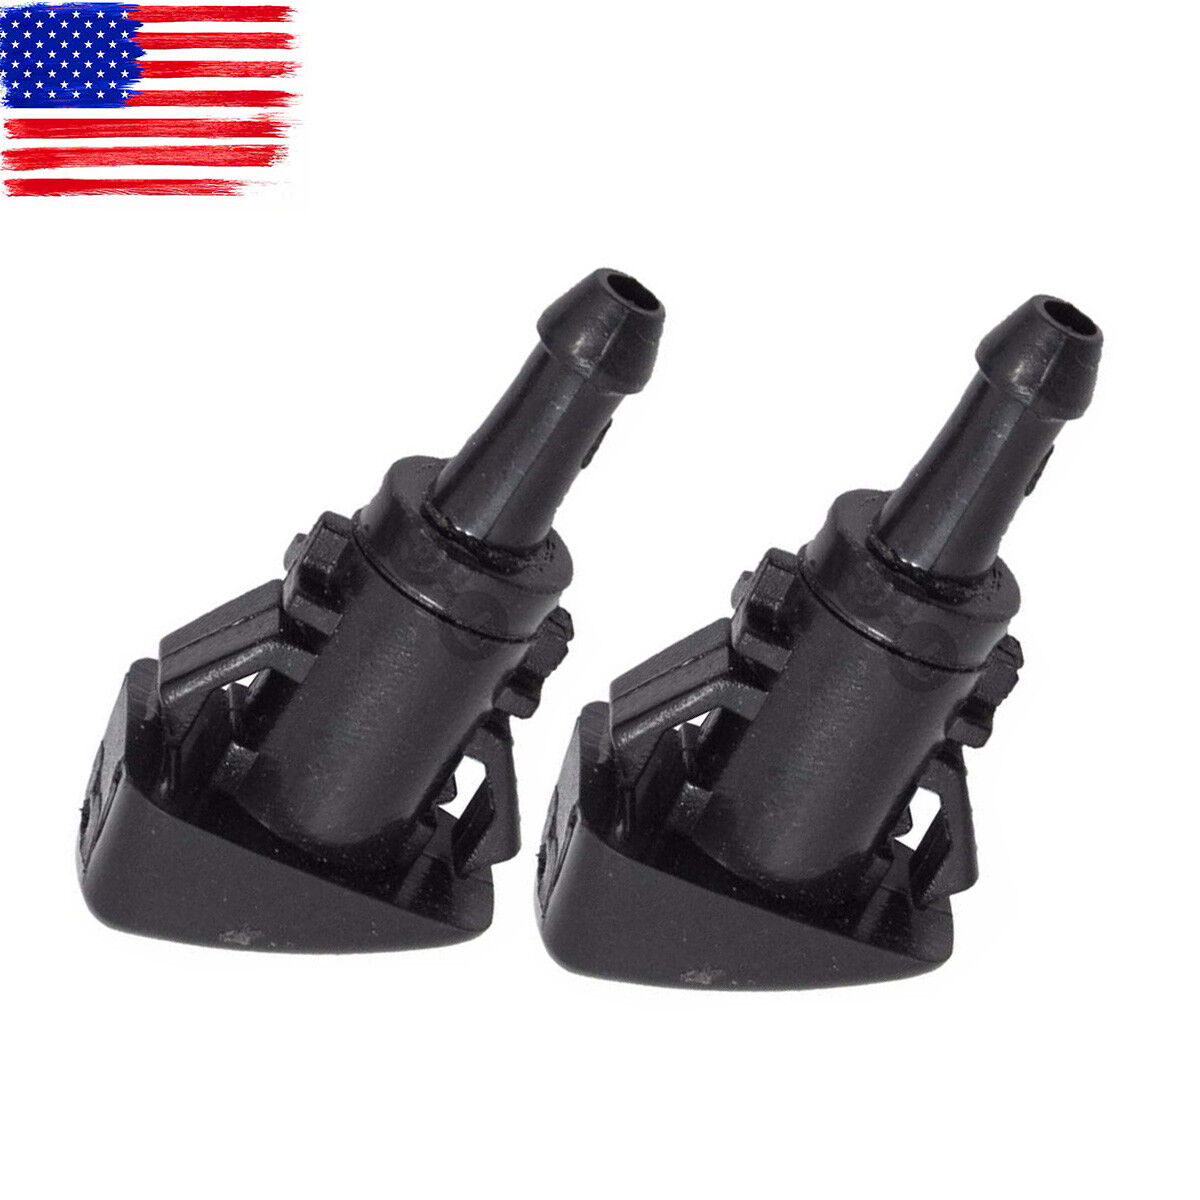 2x Windshield Washer Nozzle For Dodge RAM CHRYSLER 300 PT CRUISER TOWN & COUNTRY